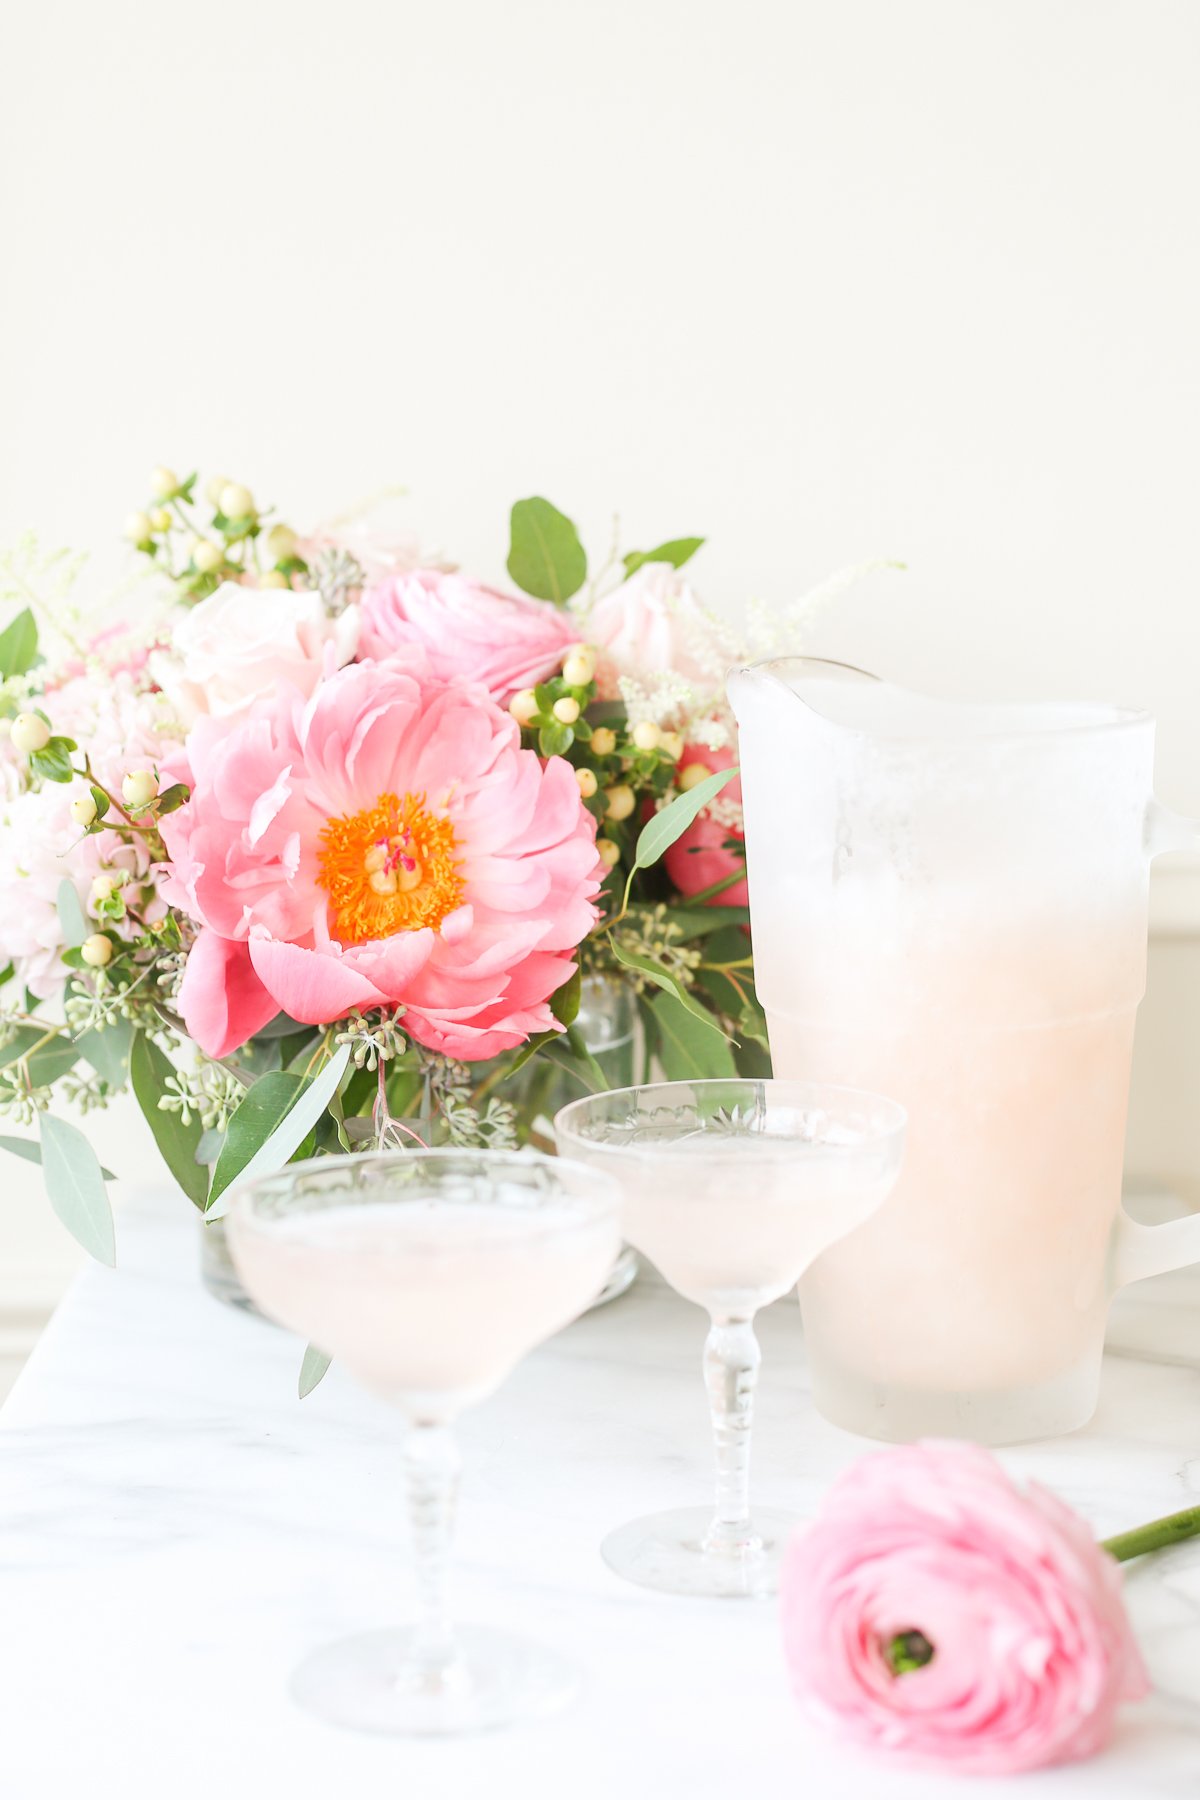 A pitcher of pink frosé sangria on a table next to a bouquet of pink flowers.